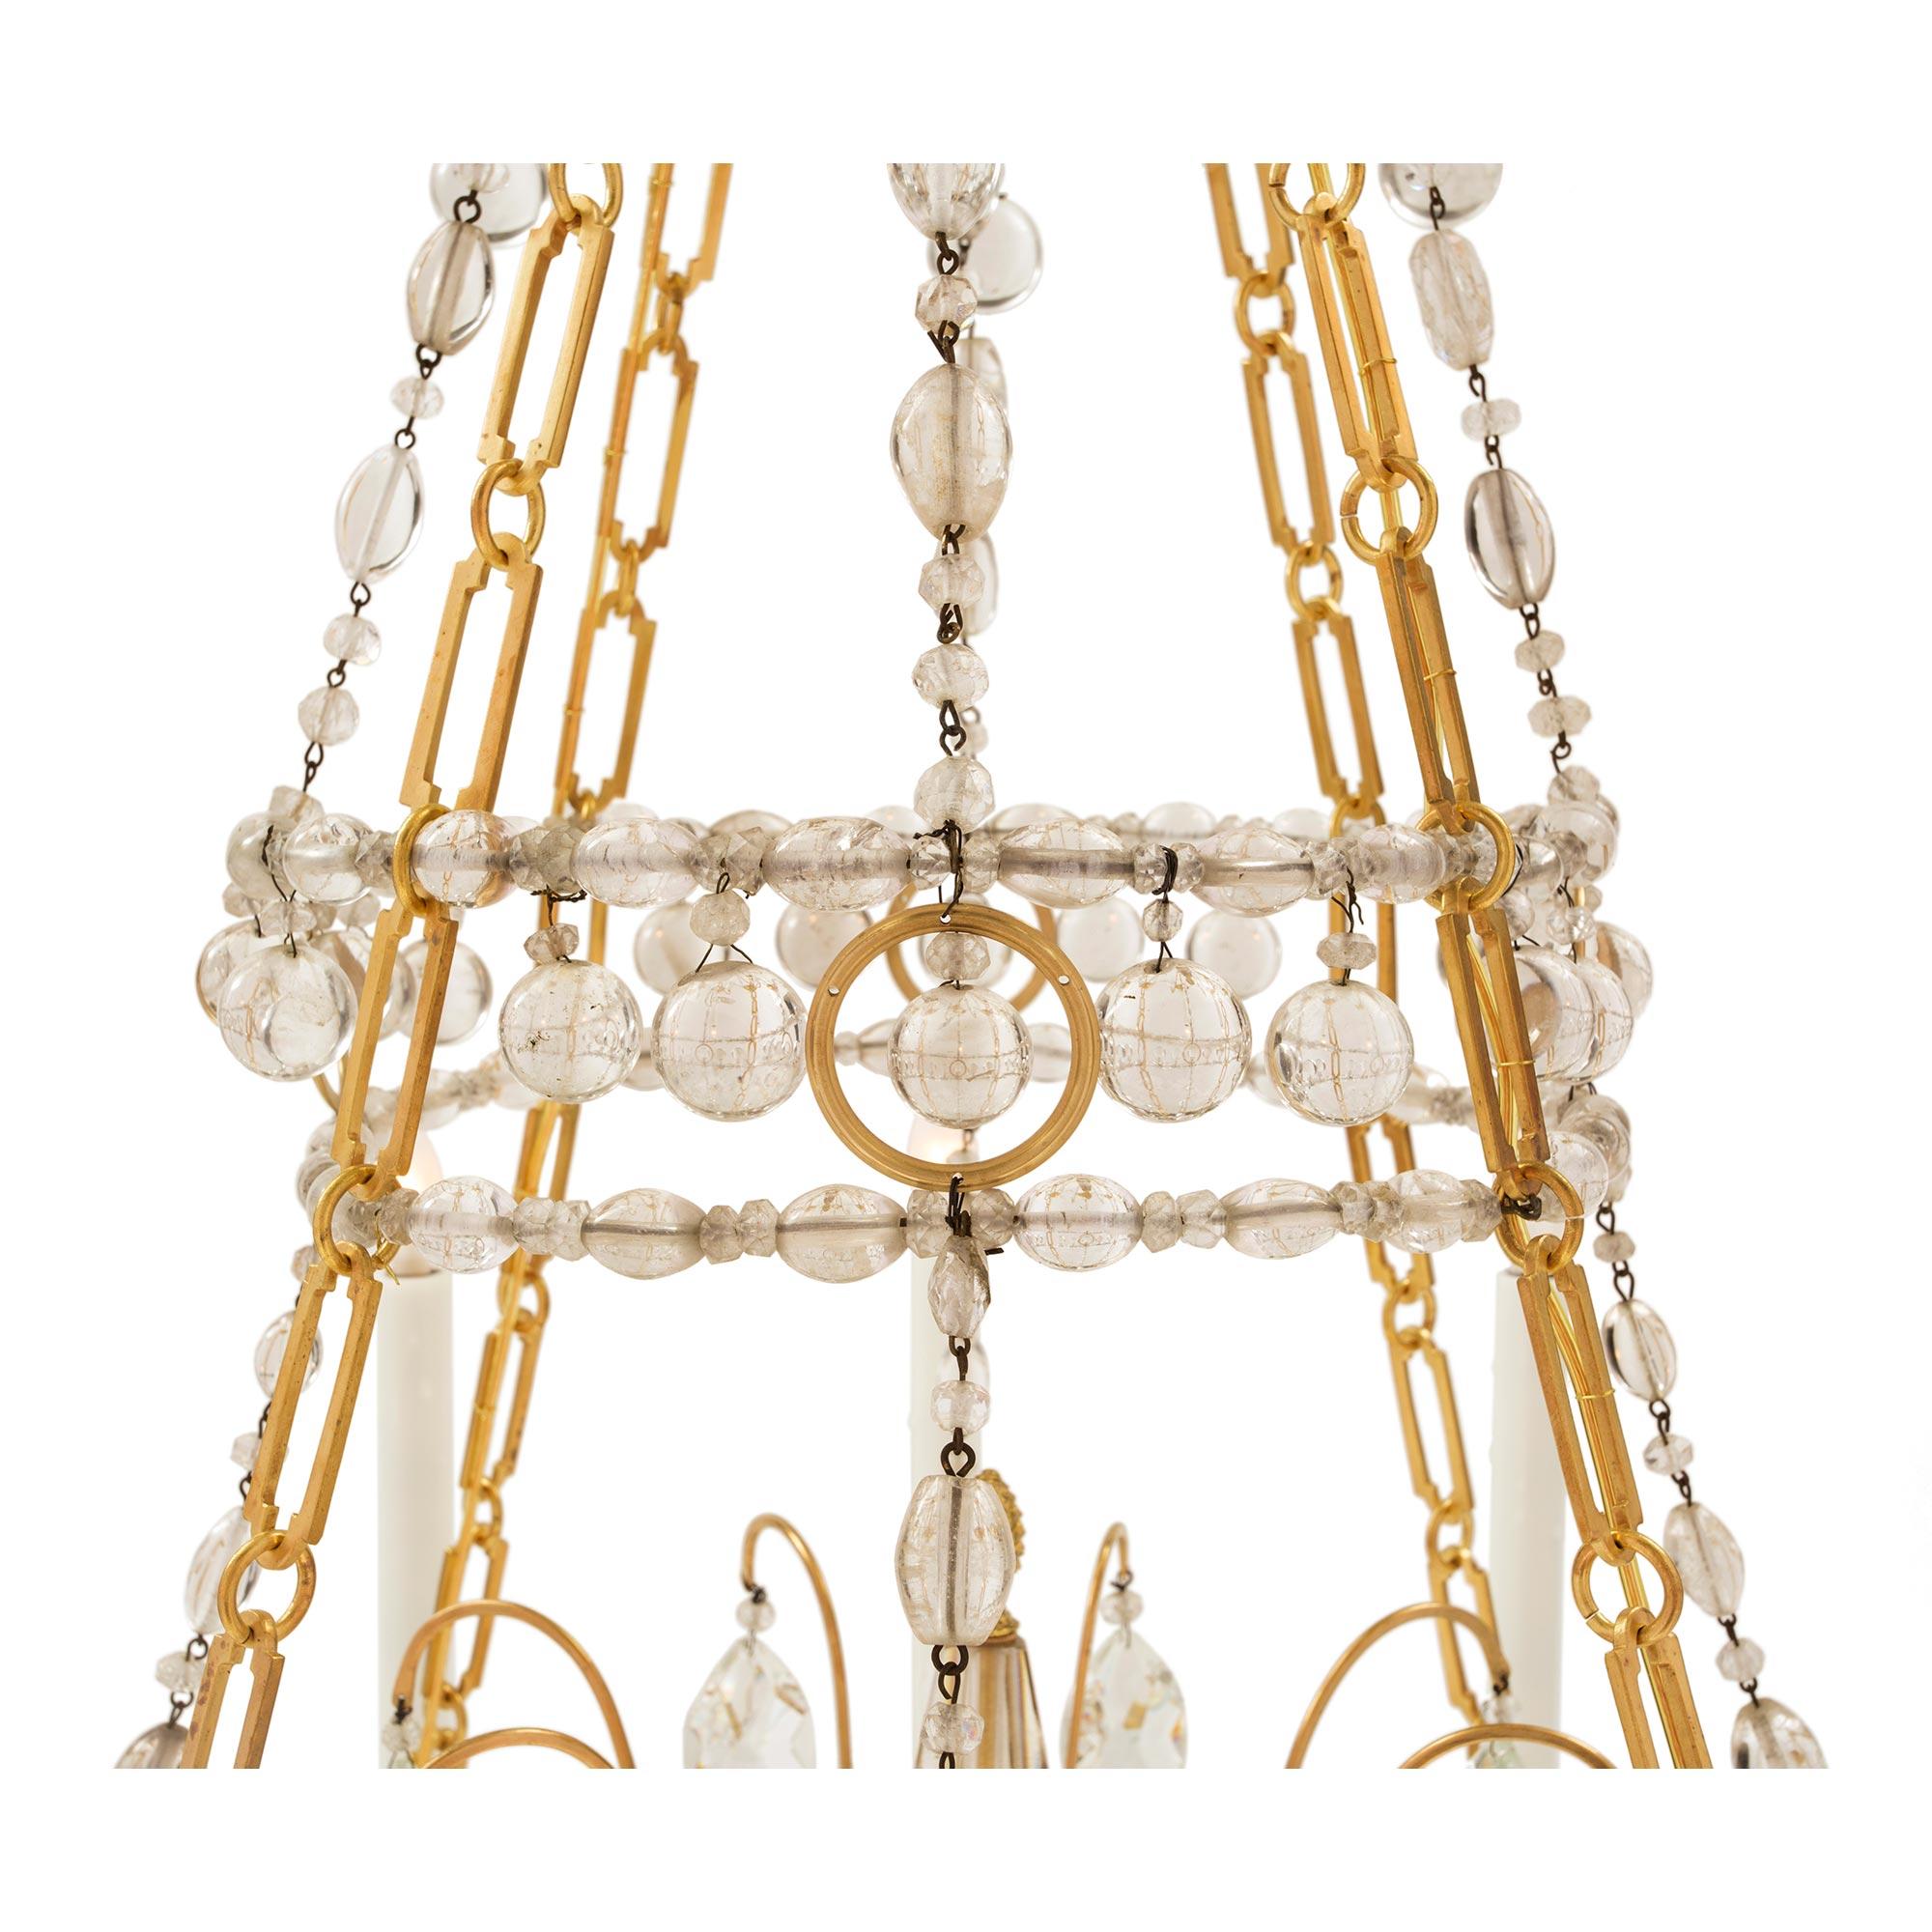 French 19th Century Louis XVI Style Ormolu, Baccarat and Rock Crystal Chandelier For Sale 1